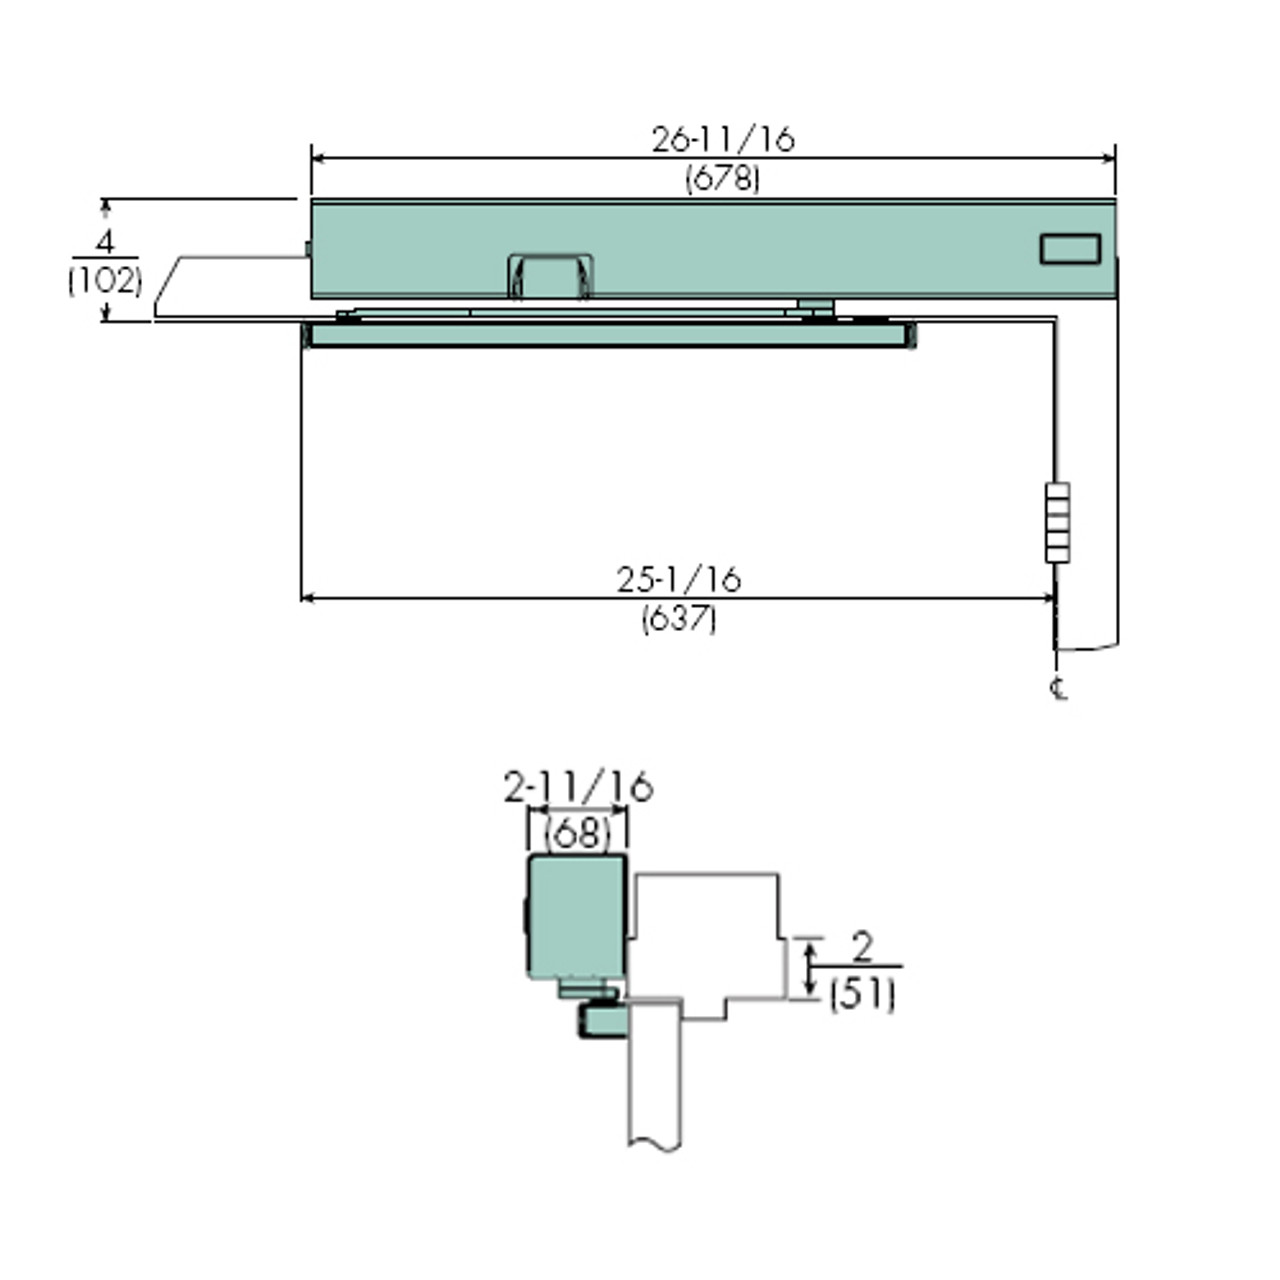 7113SZ-DZ-RH-120VAC-691 Norton 7100SZ Series Safe Zone Multi-Point Closer/Holder with Motion Sensor and Pull Side Rigid Arm and Slide Track in Dull Bronze Finish